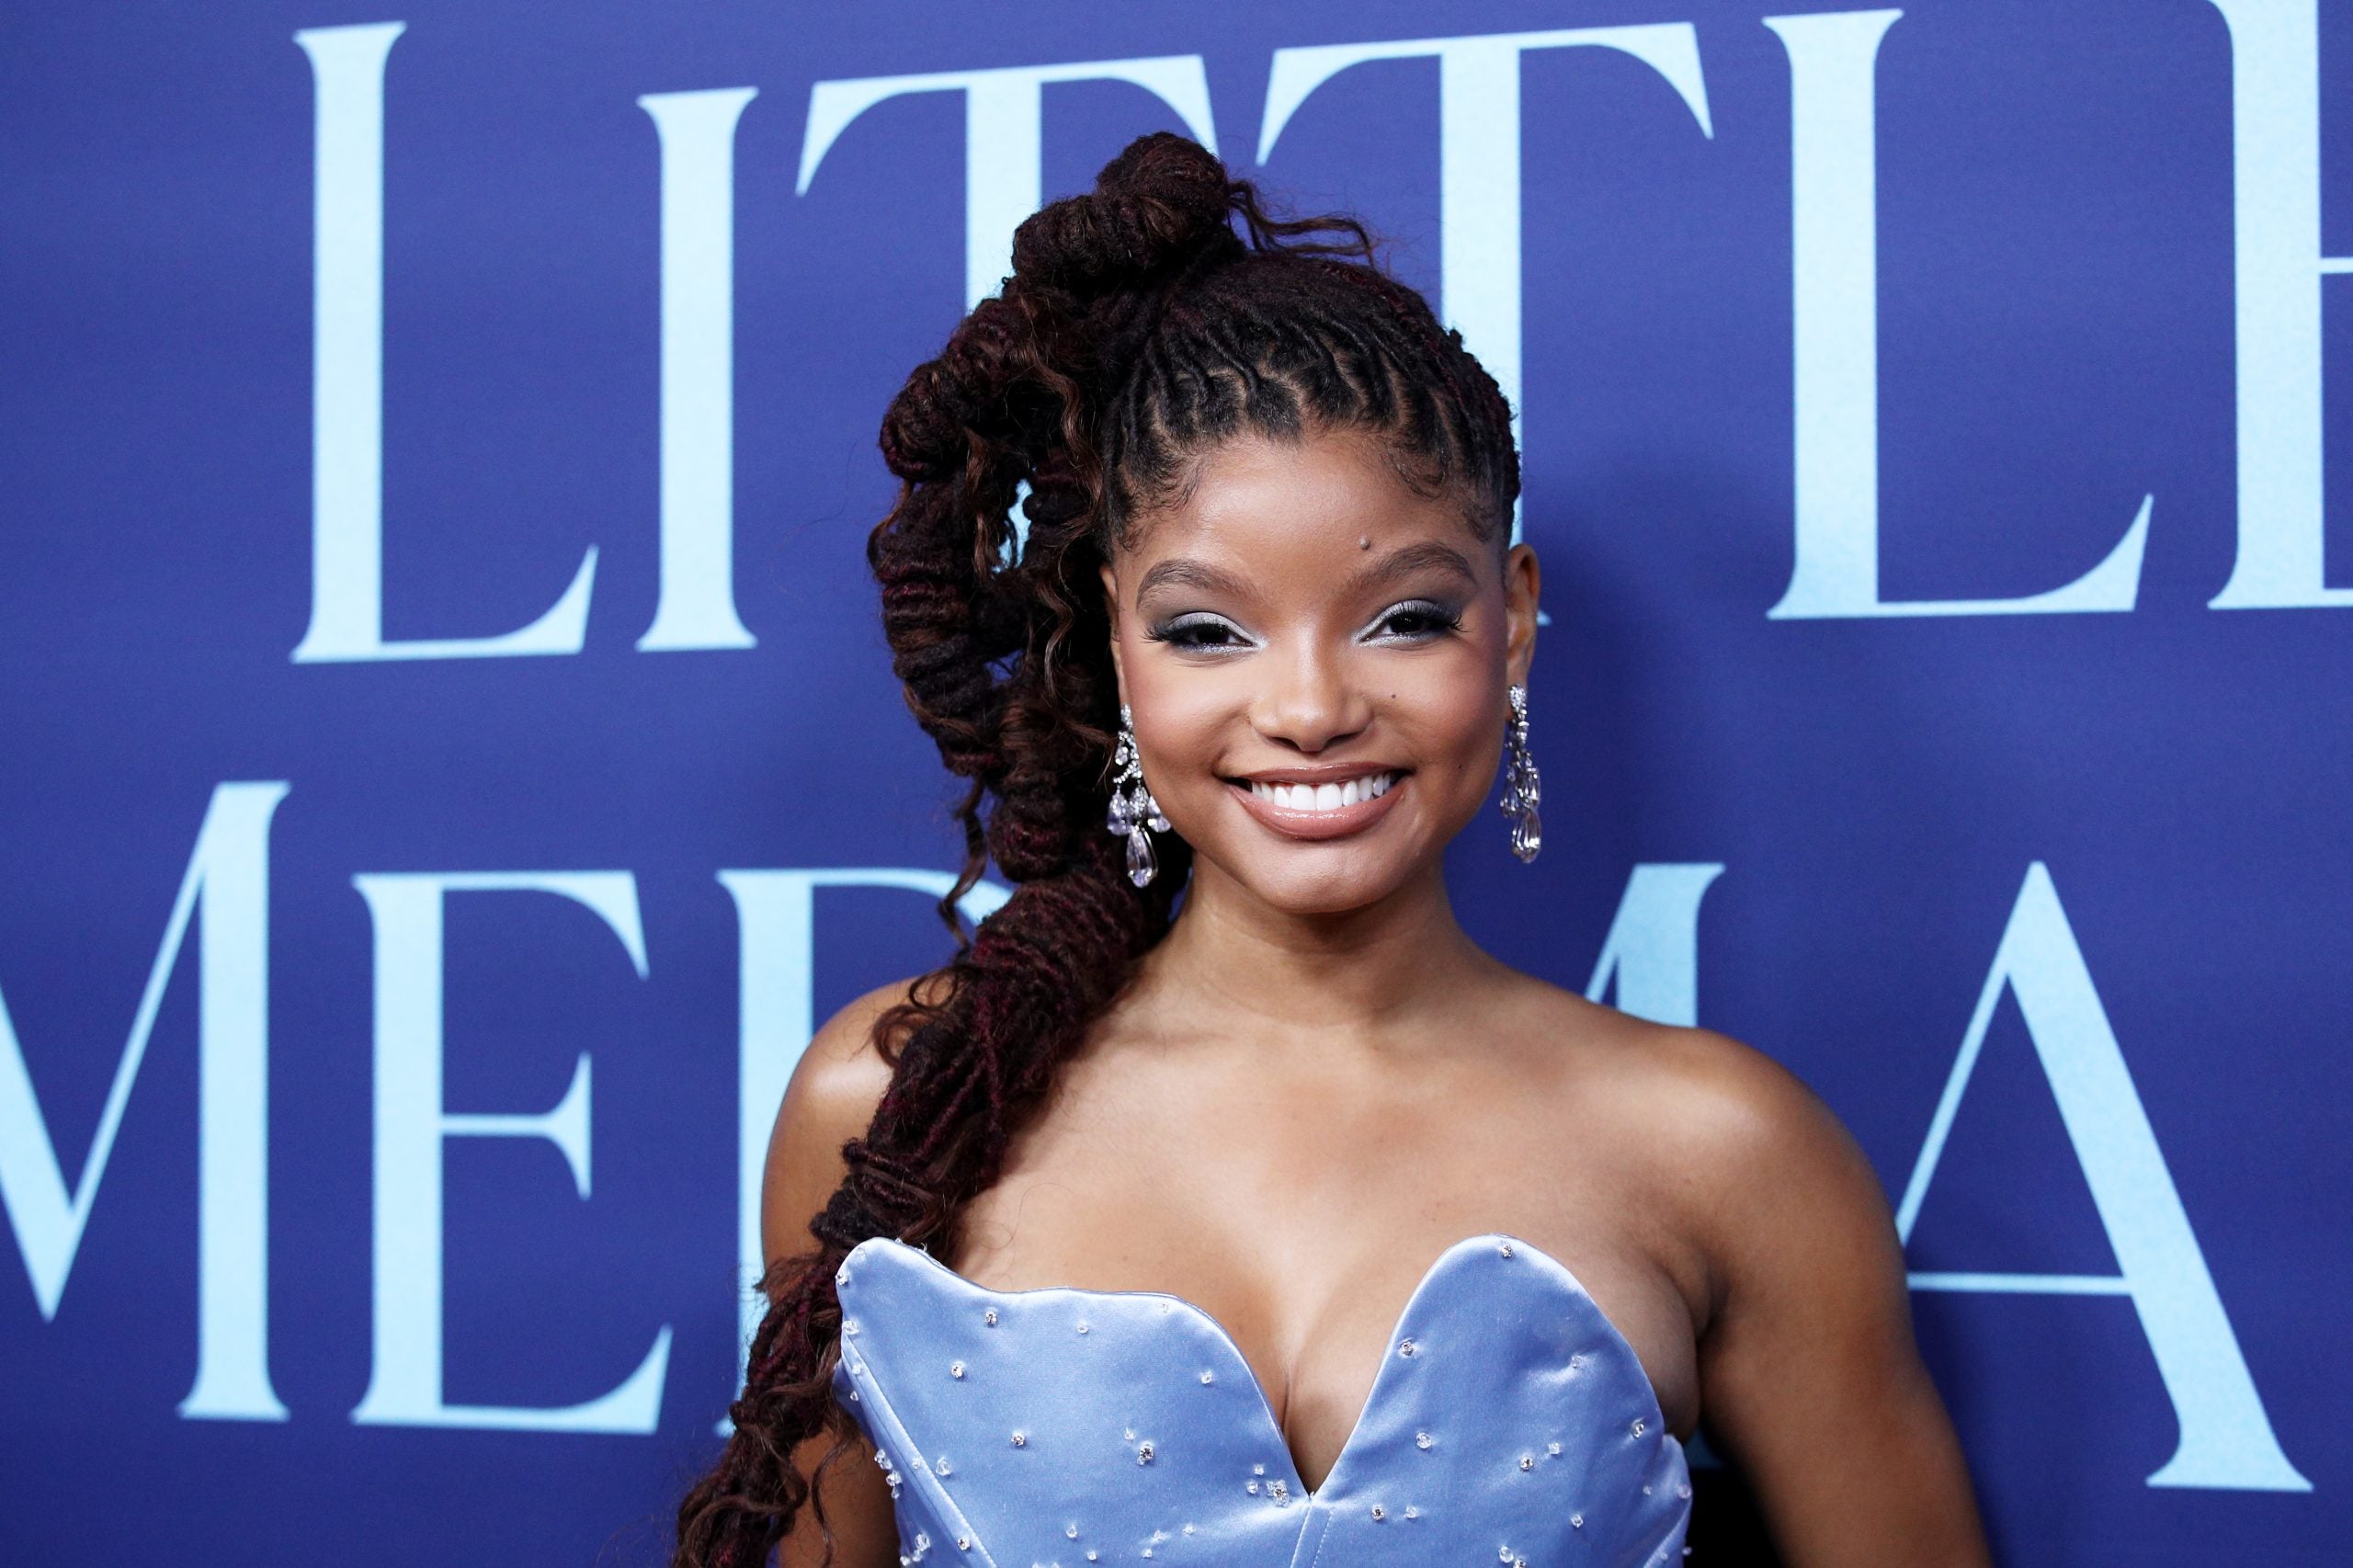 WATCH: Halle Bailey Says She's Ready To Inspire Little Girls Everywhere With Her Role In "The Little Mermaid"